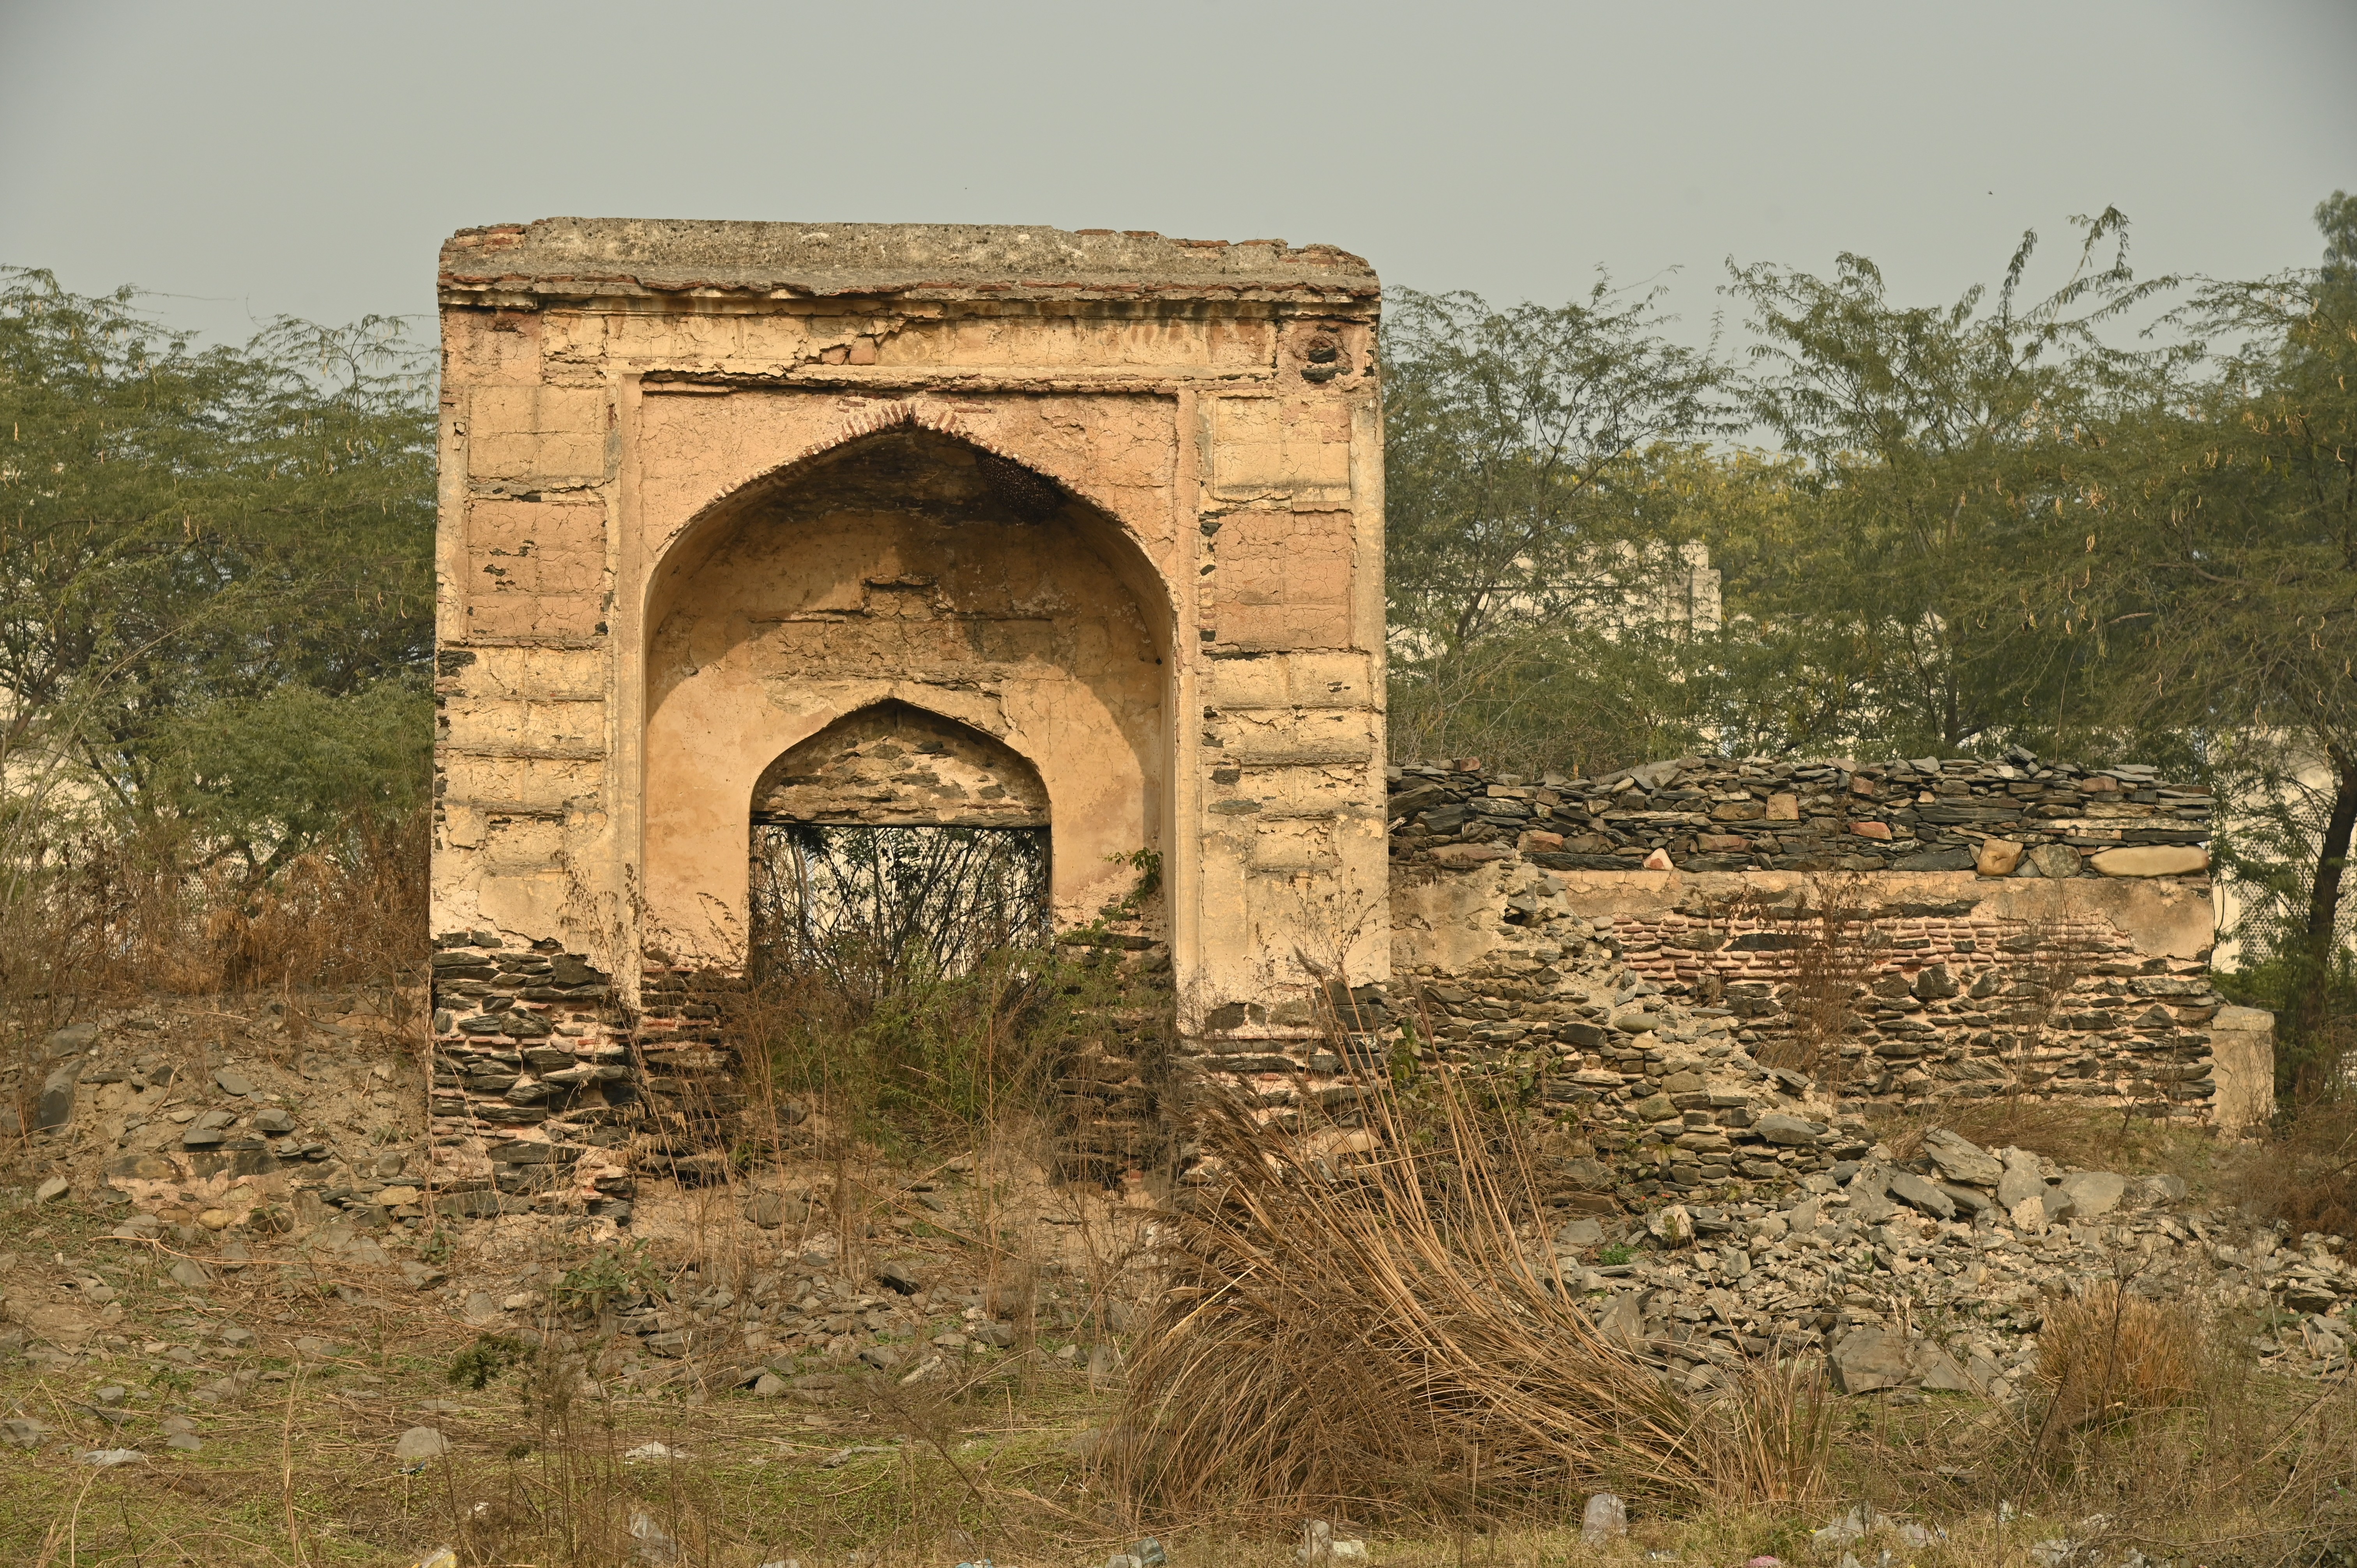 The crumbling beauty and fading colors of the remains of the ancient site near The Attock Tomb